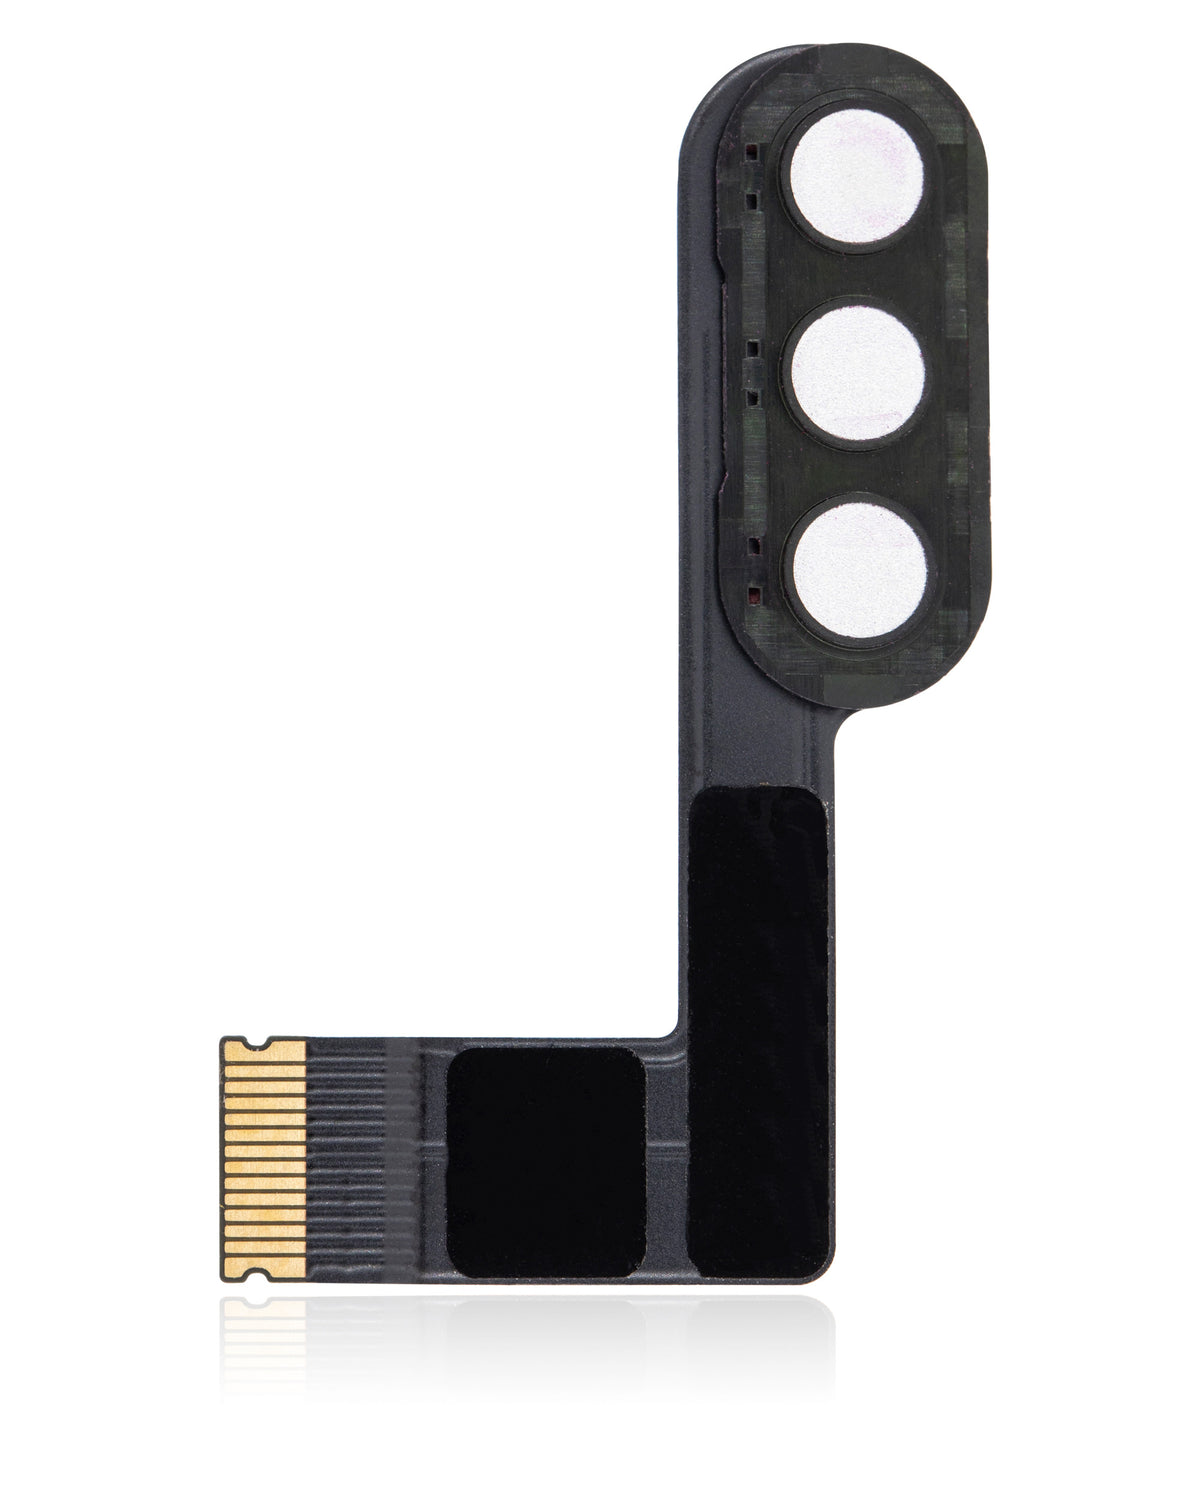 KEYBOARD FLEX CABLE COMPATIBLE FOR IPAD AIR 4 - SPACE GRAY